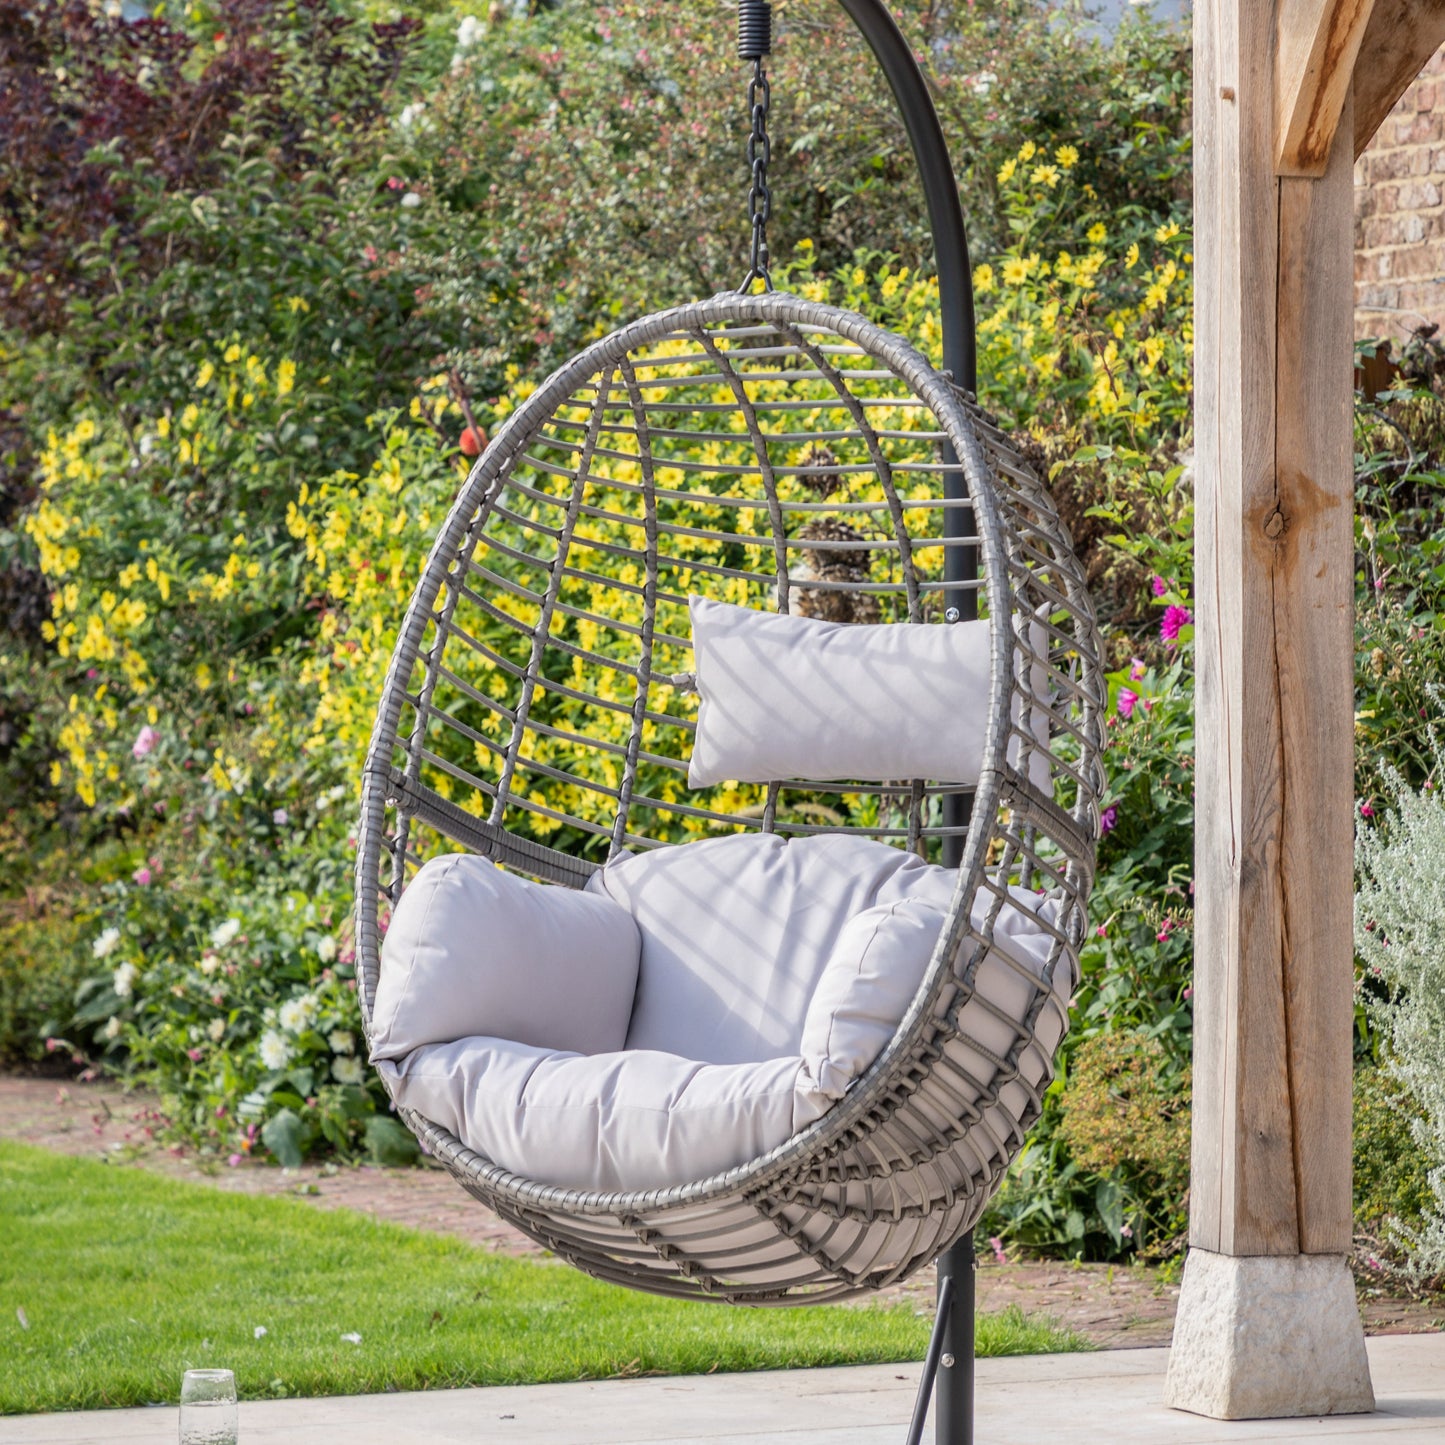 A Woodleigh Hanging Chair by Kikiathome.co.uk adds charm to a garden.